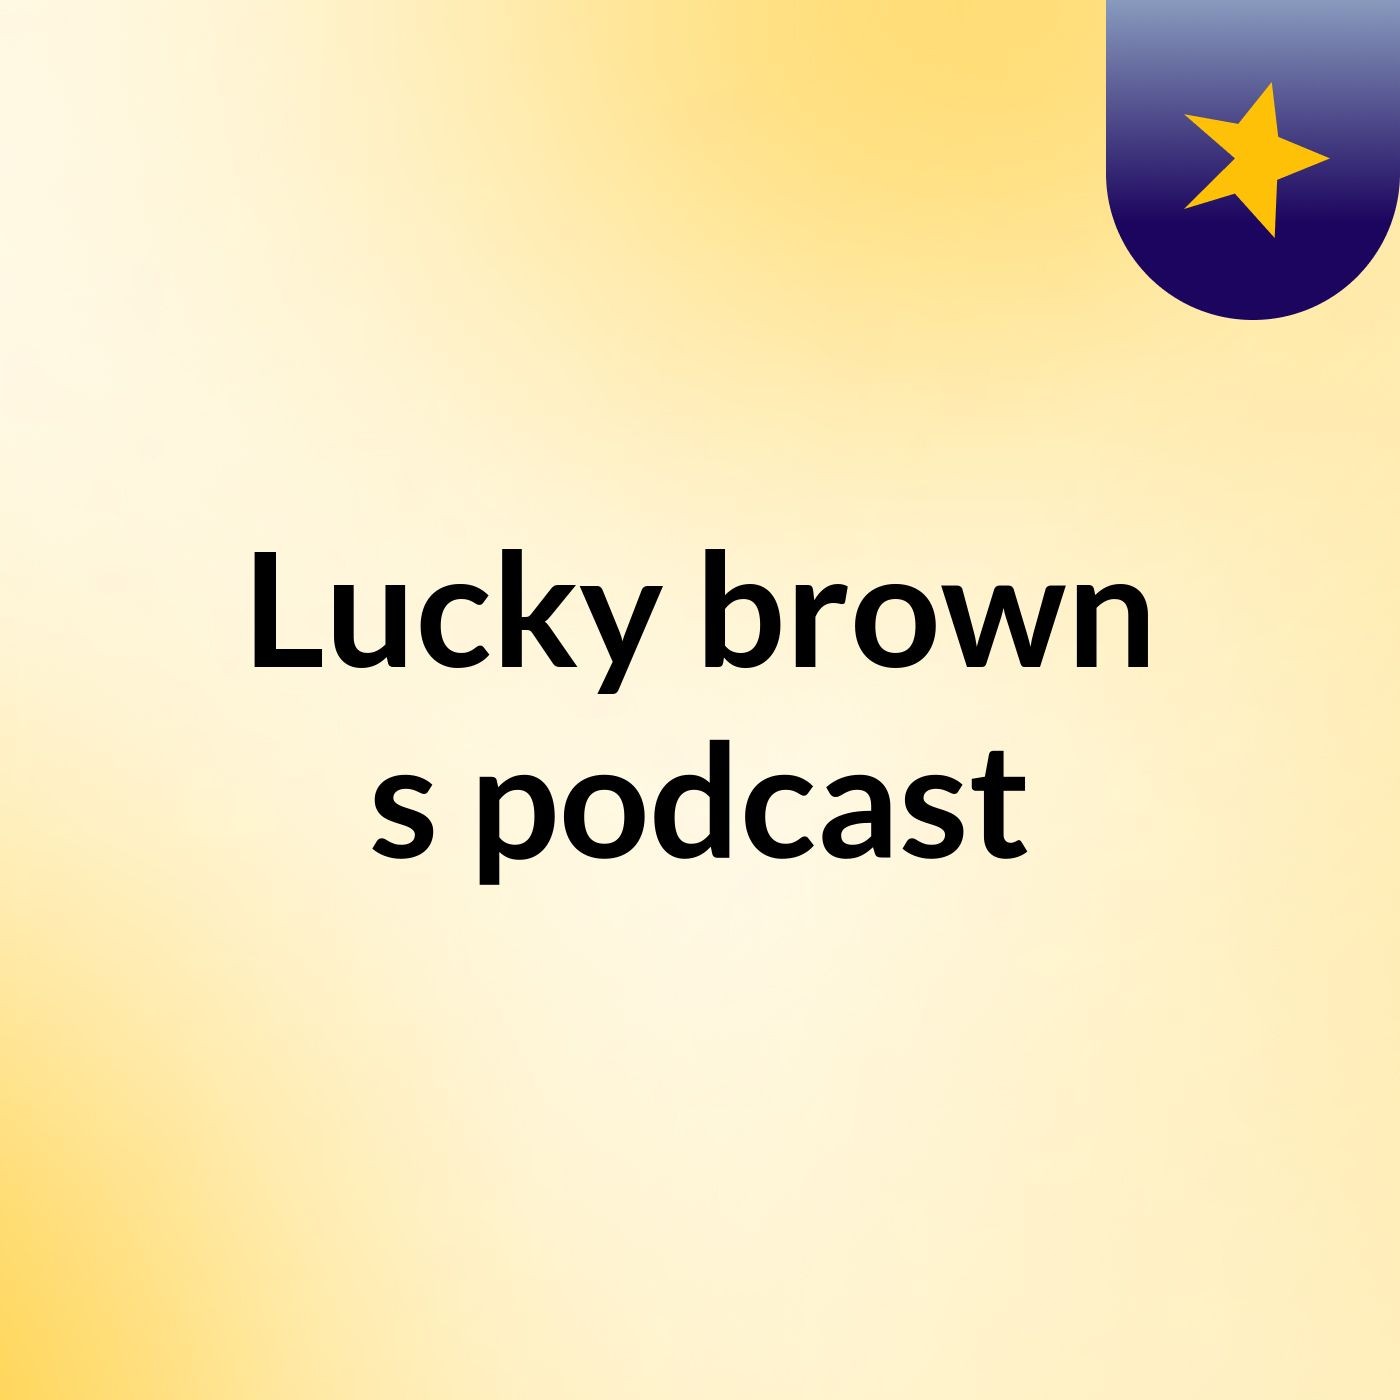 Lucky brown's podcast